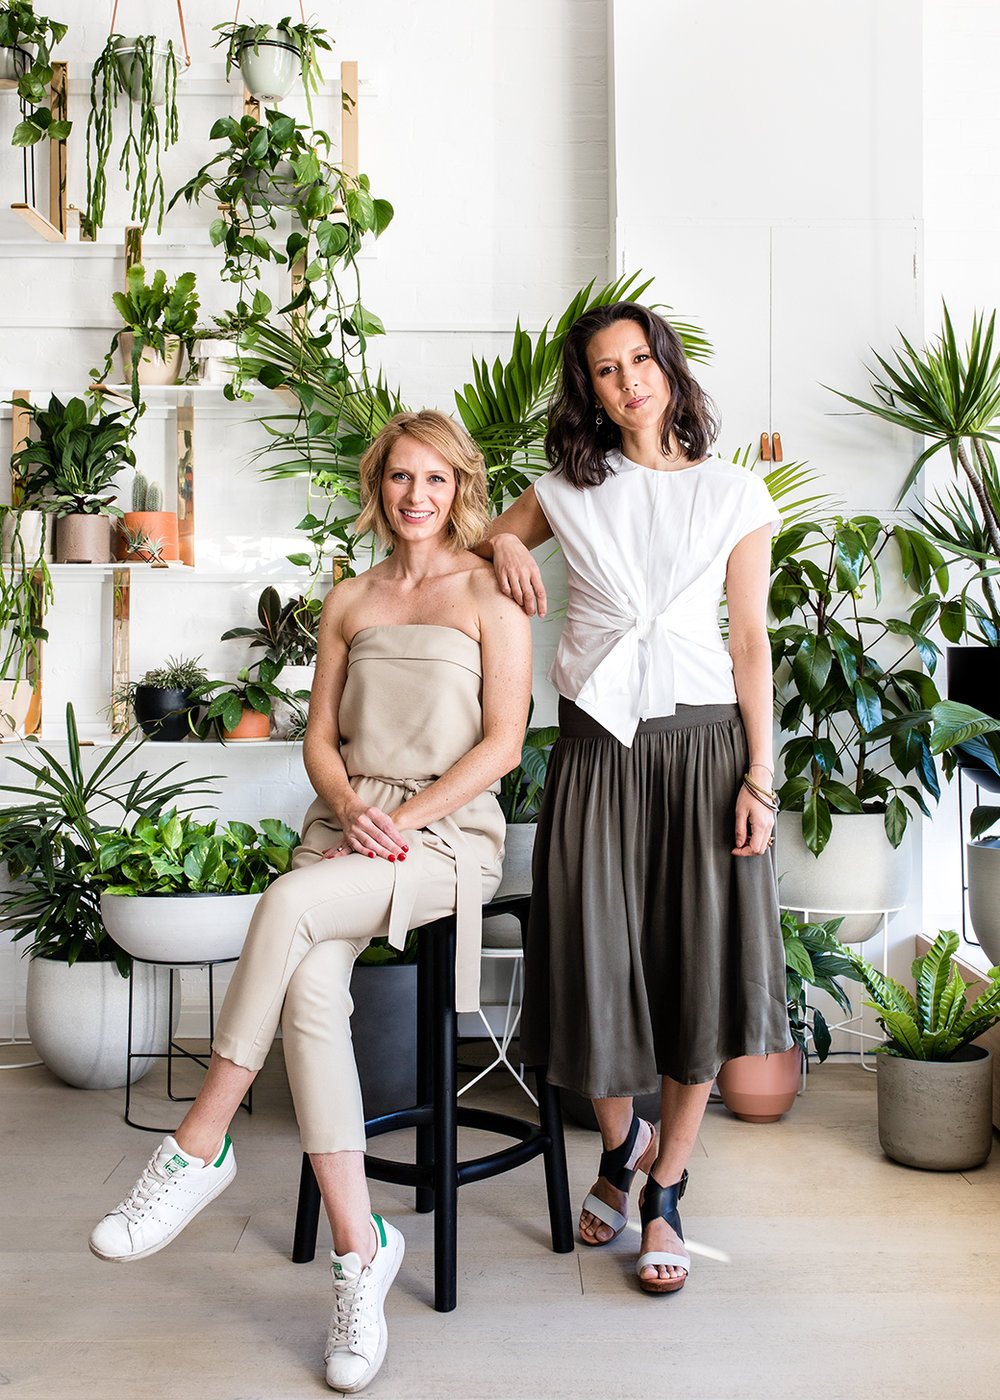 Alana Langan (left) and Jacqui Vidal (right), IVY MUSE Co-Founders.